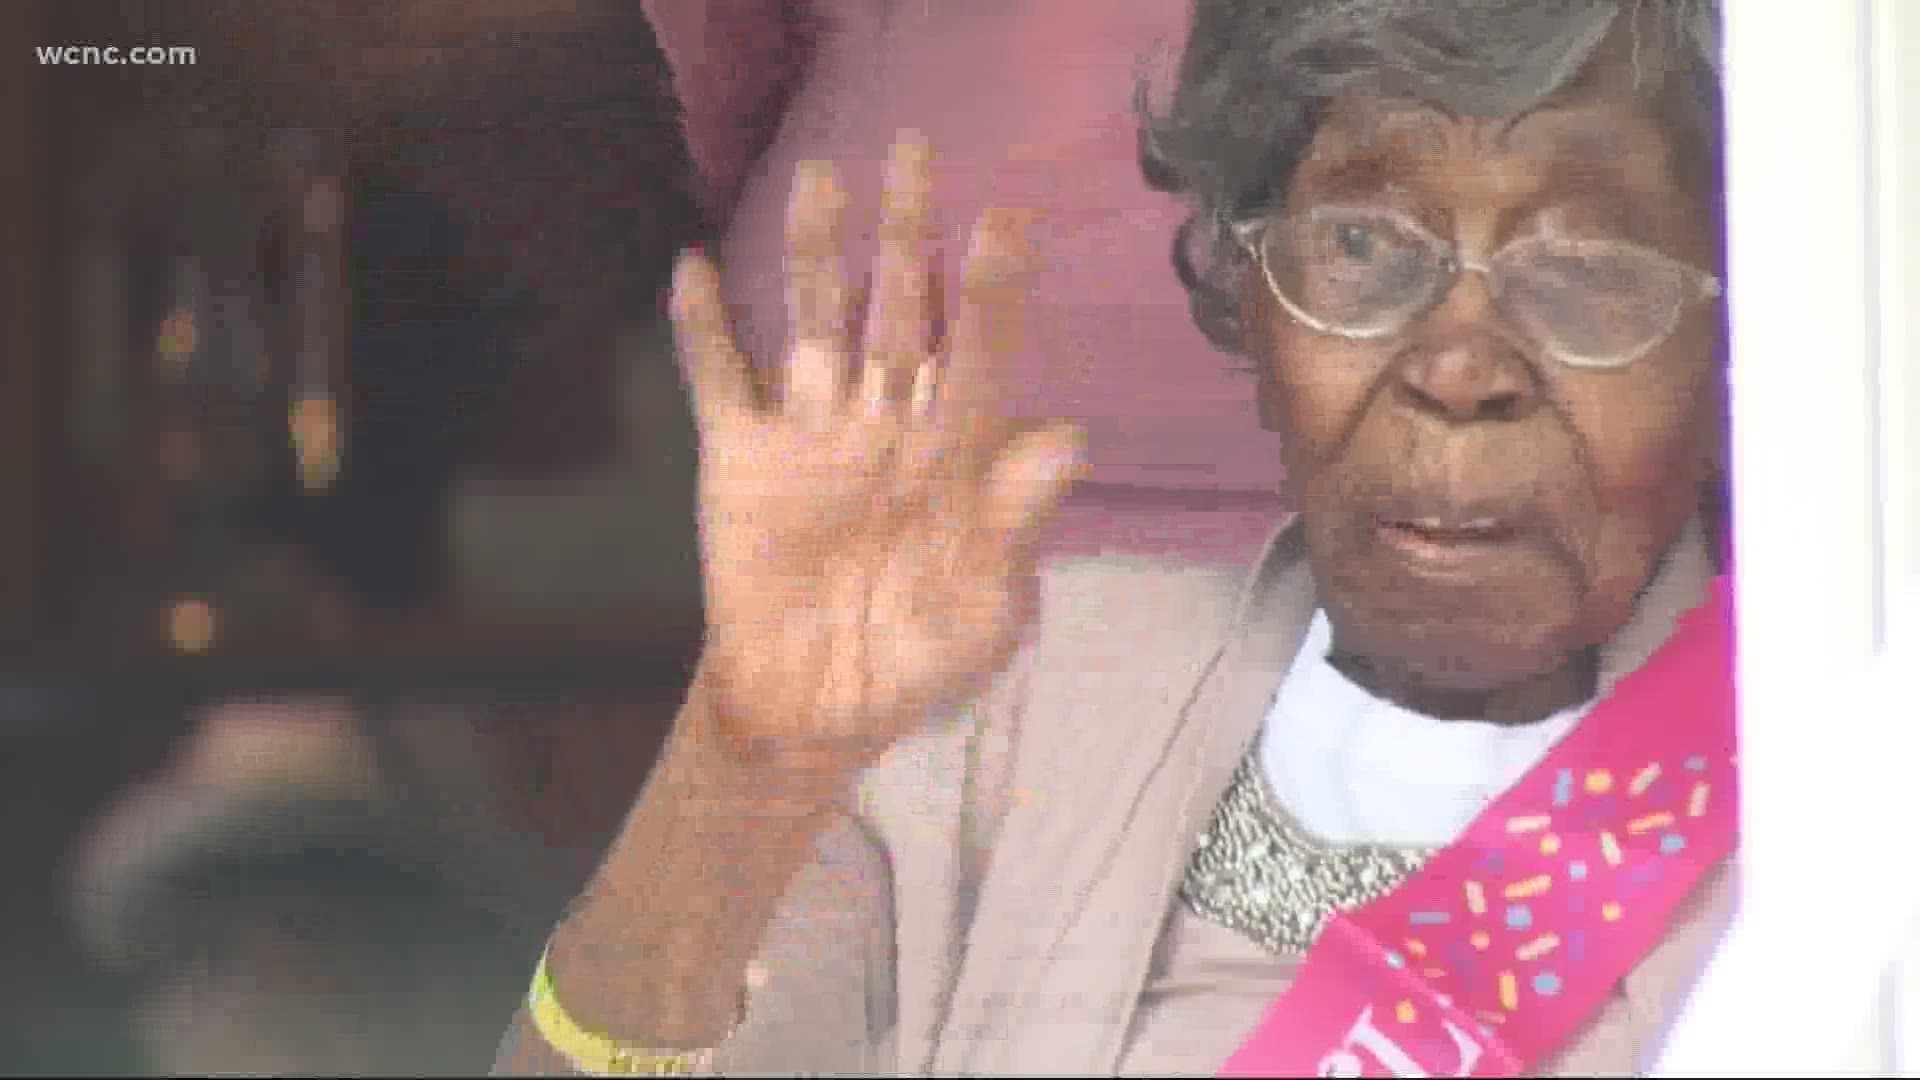 Oldest person alive